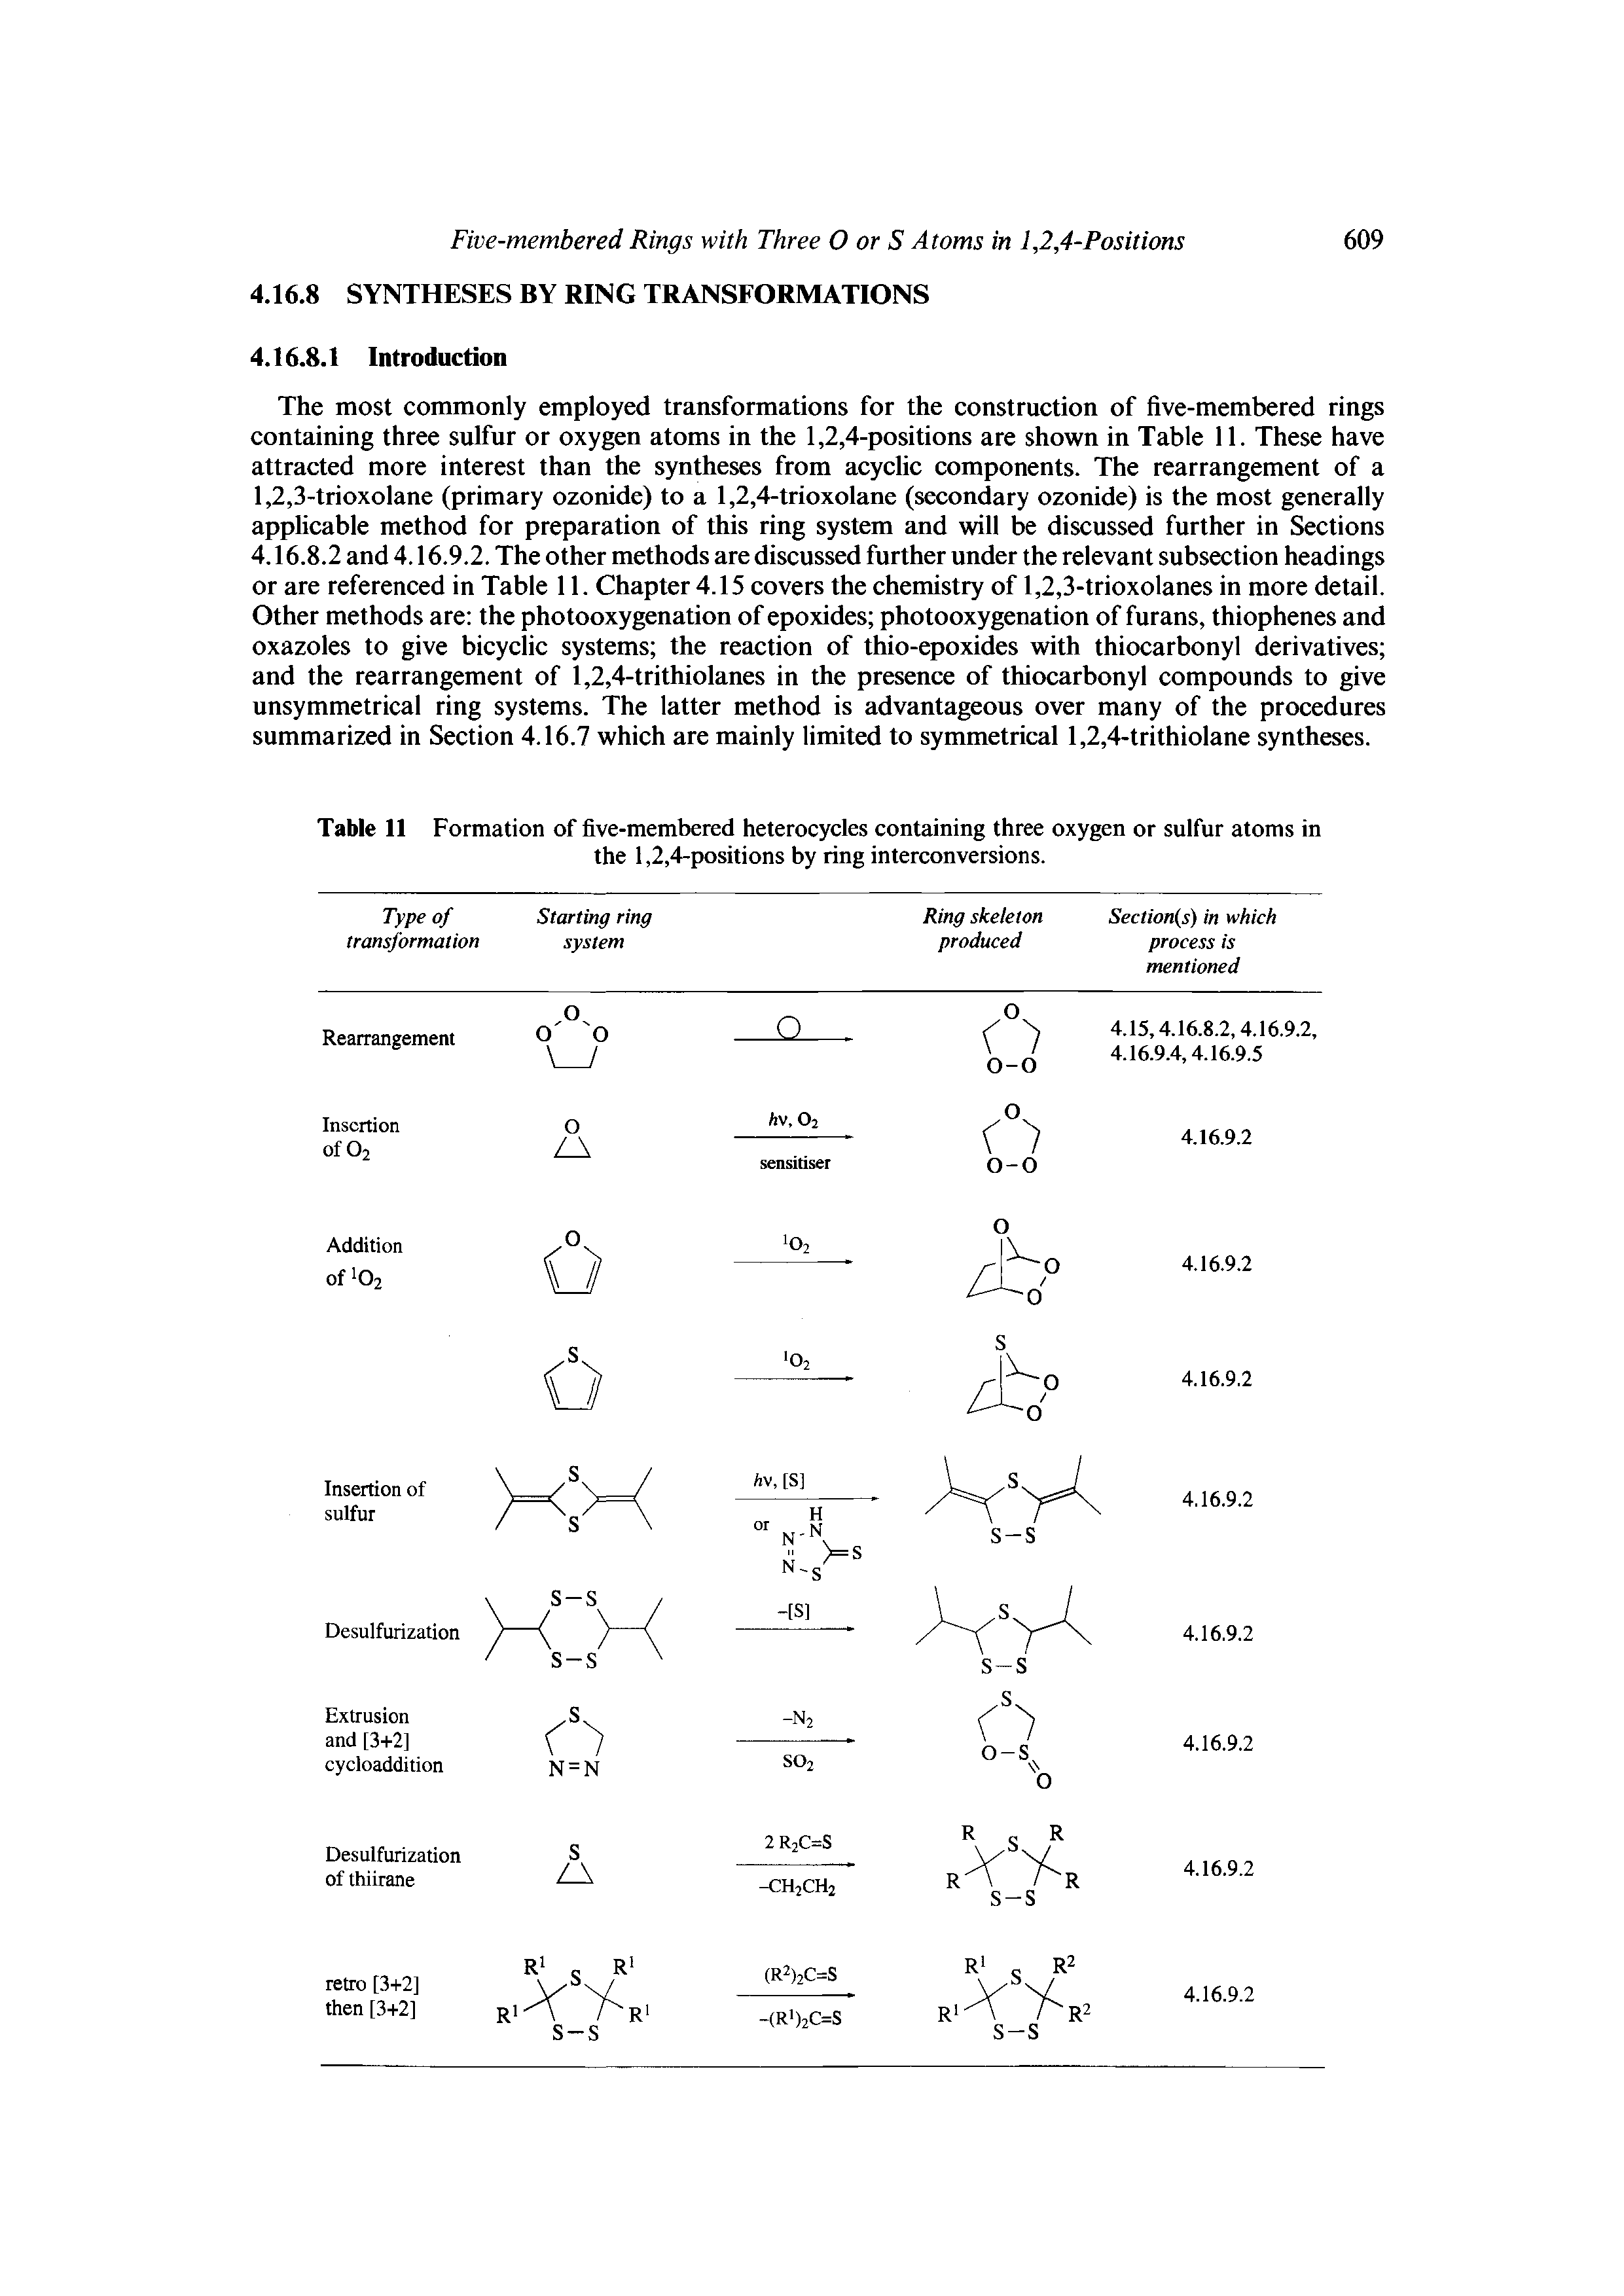 Table 11 Formation of five-membered heterocycles containing three oxygen or sulfur atoms in the 1,2,4-positions by ring interconversions.